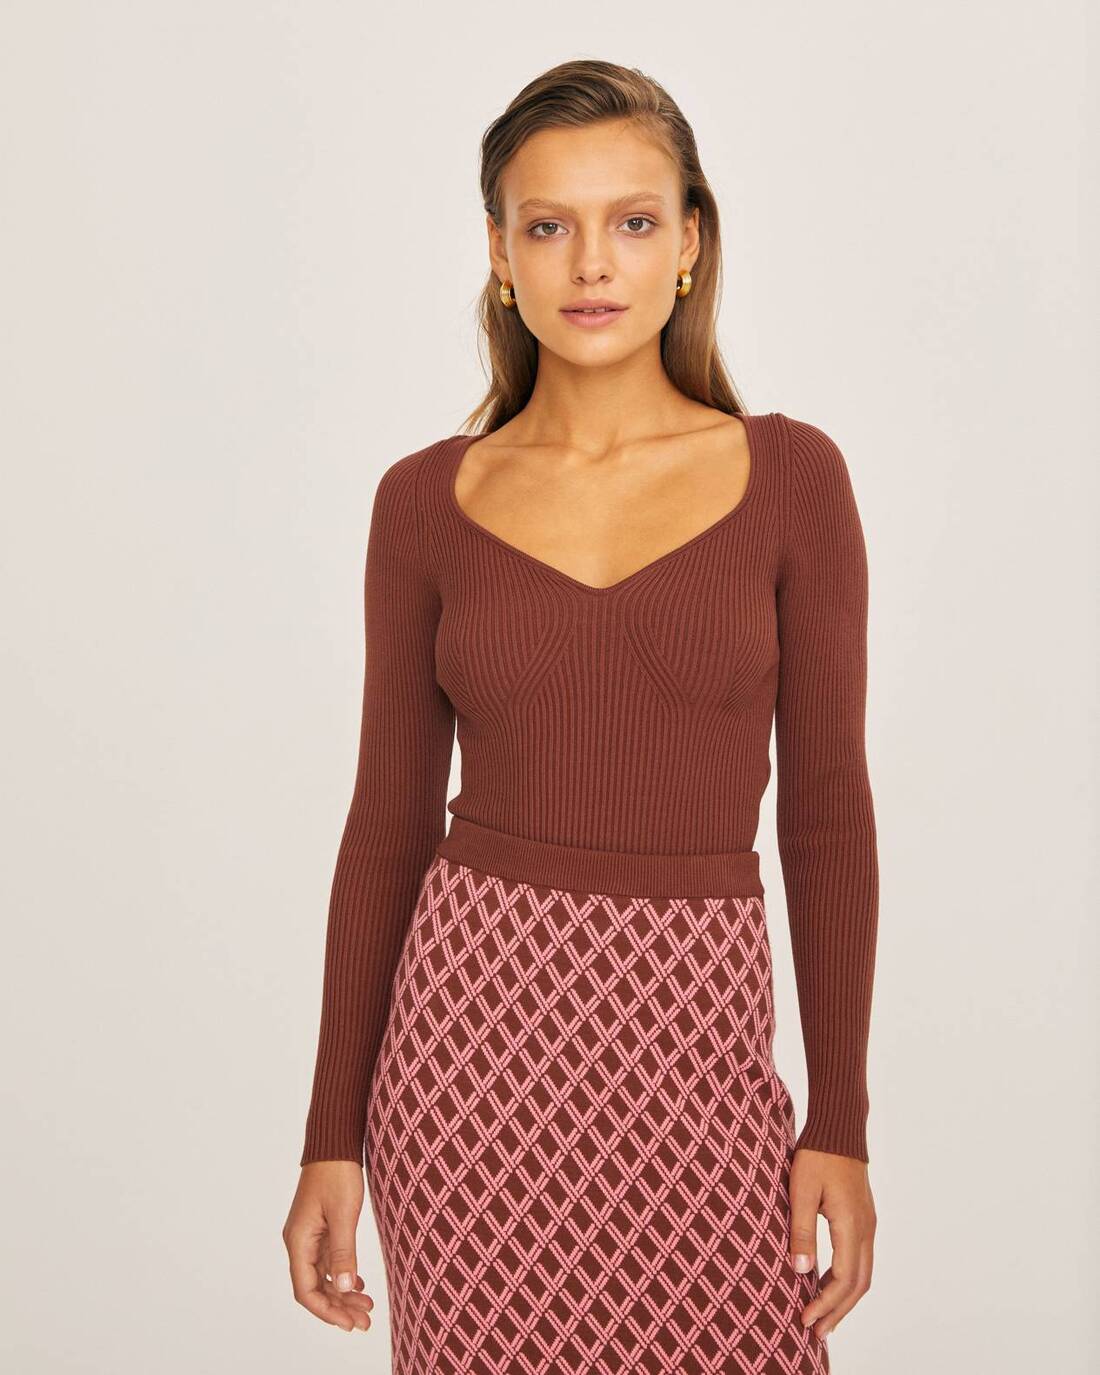 Ribbed sweater with heart neckline